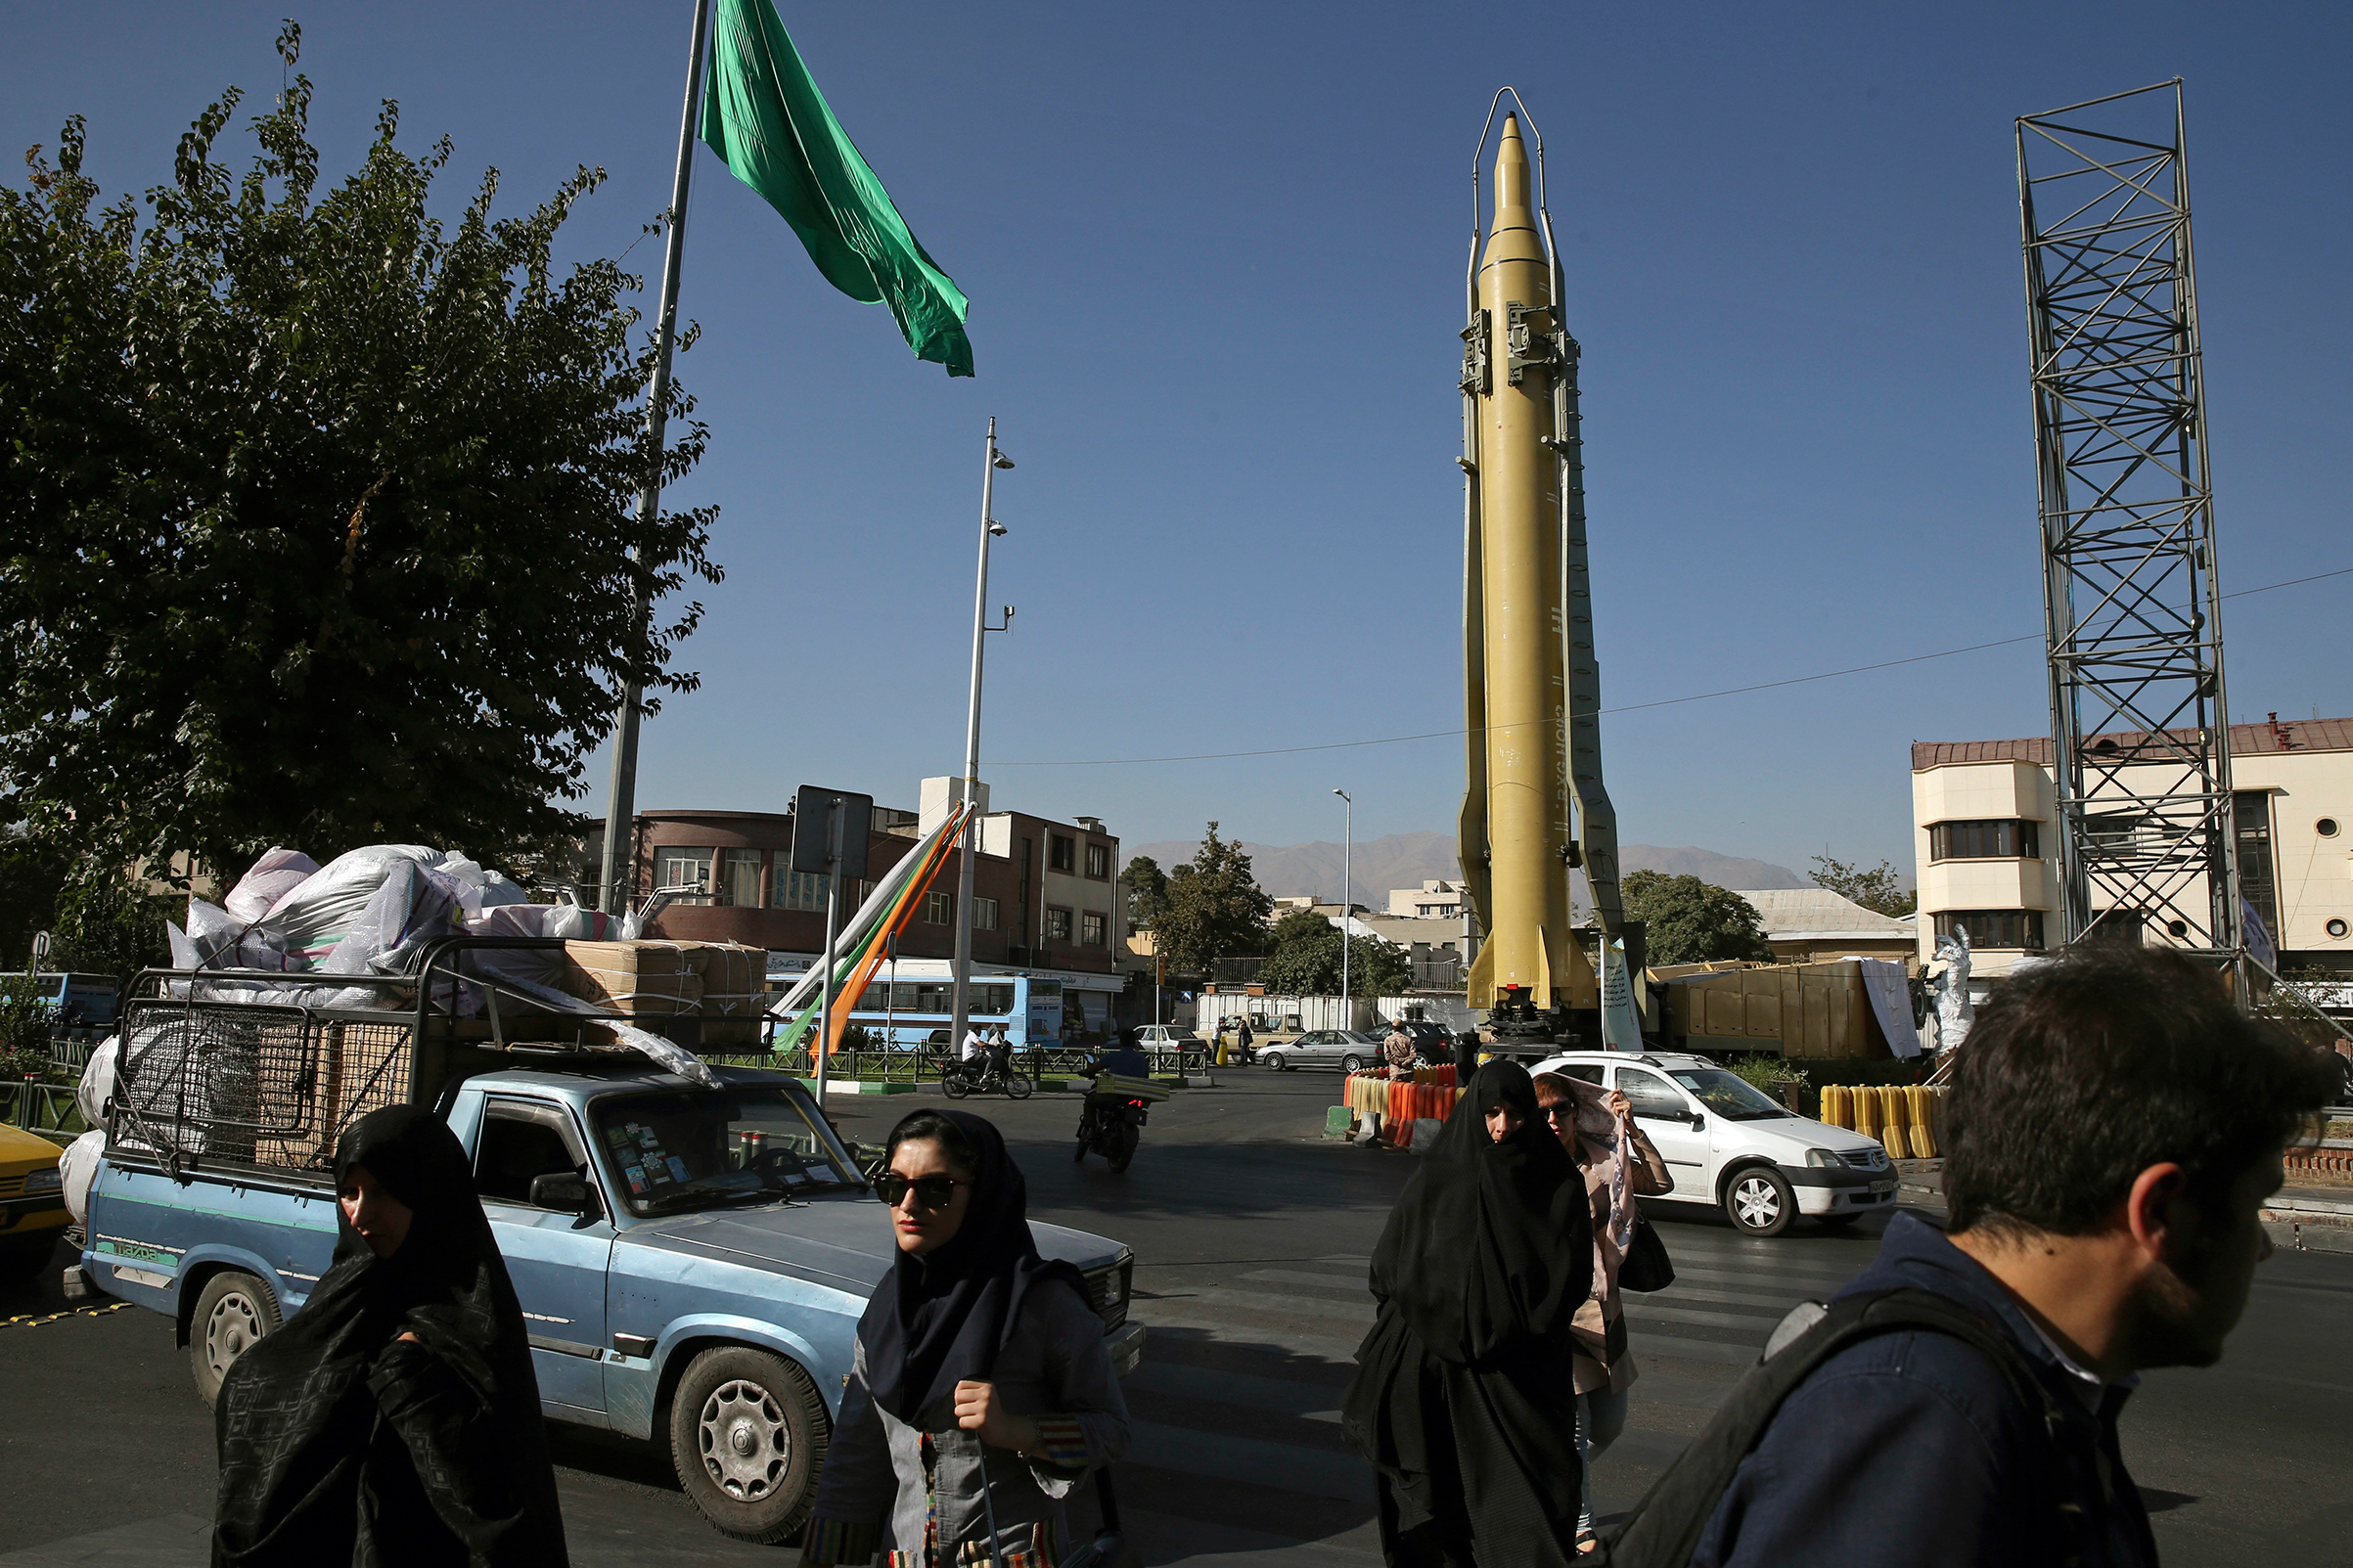 Iranians walk past a Ghadr-F missile displayed at a Revolutionary Guard hardware exhibition, marking 36th anniversary of the outset of Iran-Iraq war, in downtown Tehran on Sept. 25, 2016. (Vahid Salemi—AP/REX/Shutterstock)